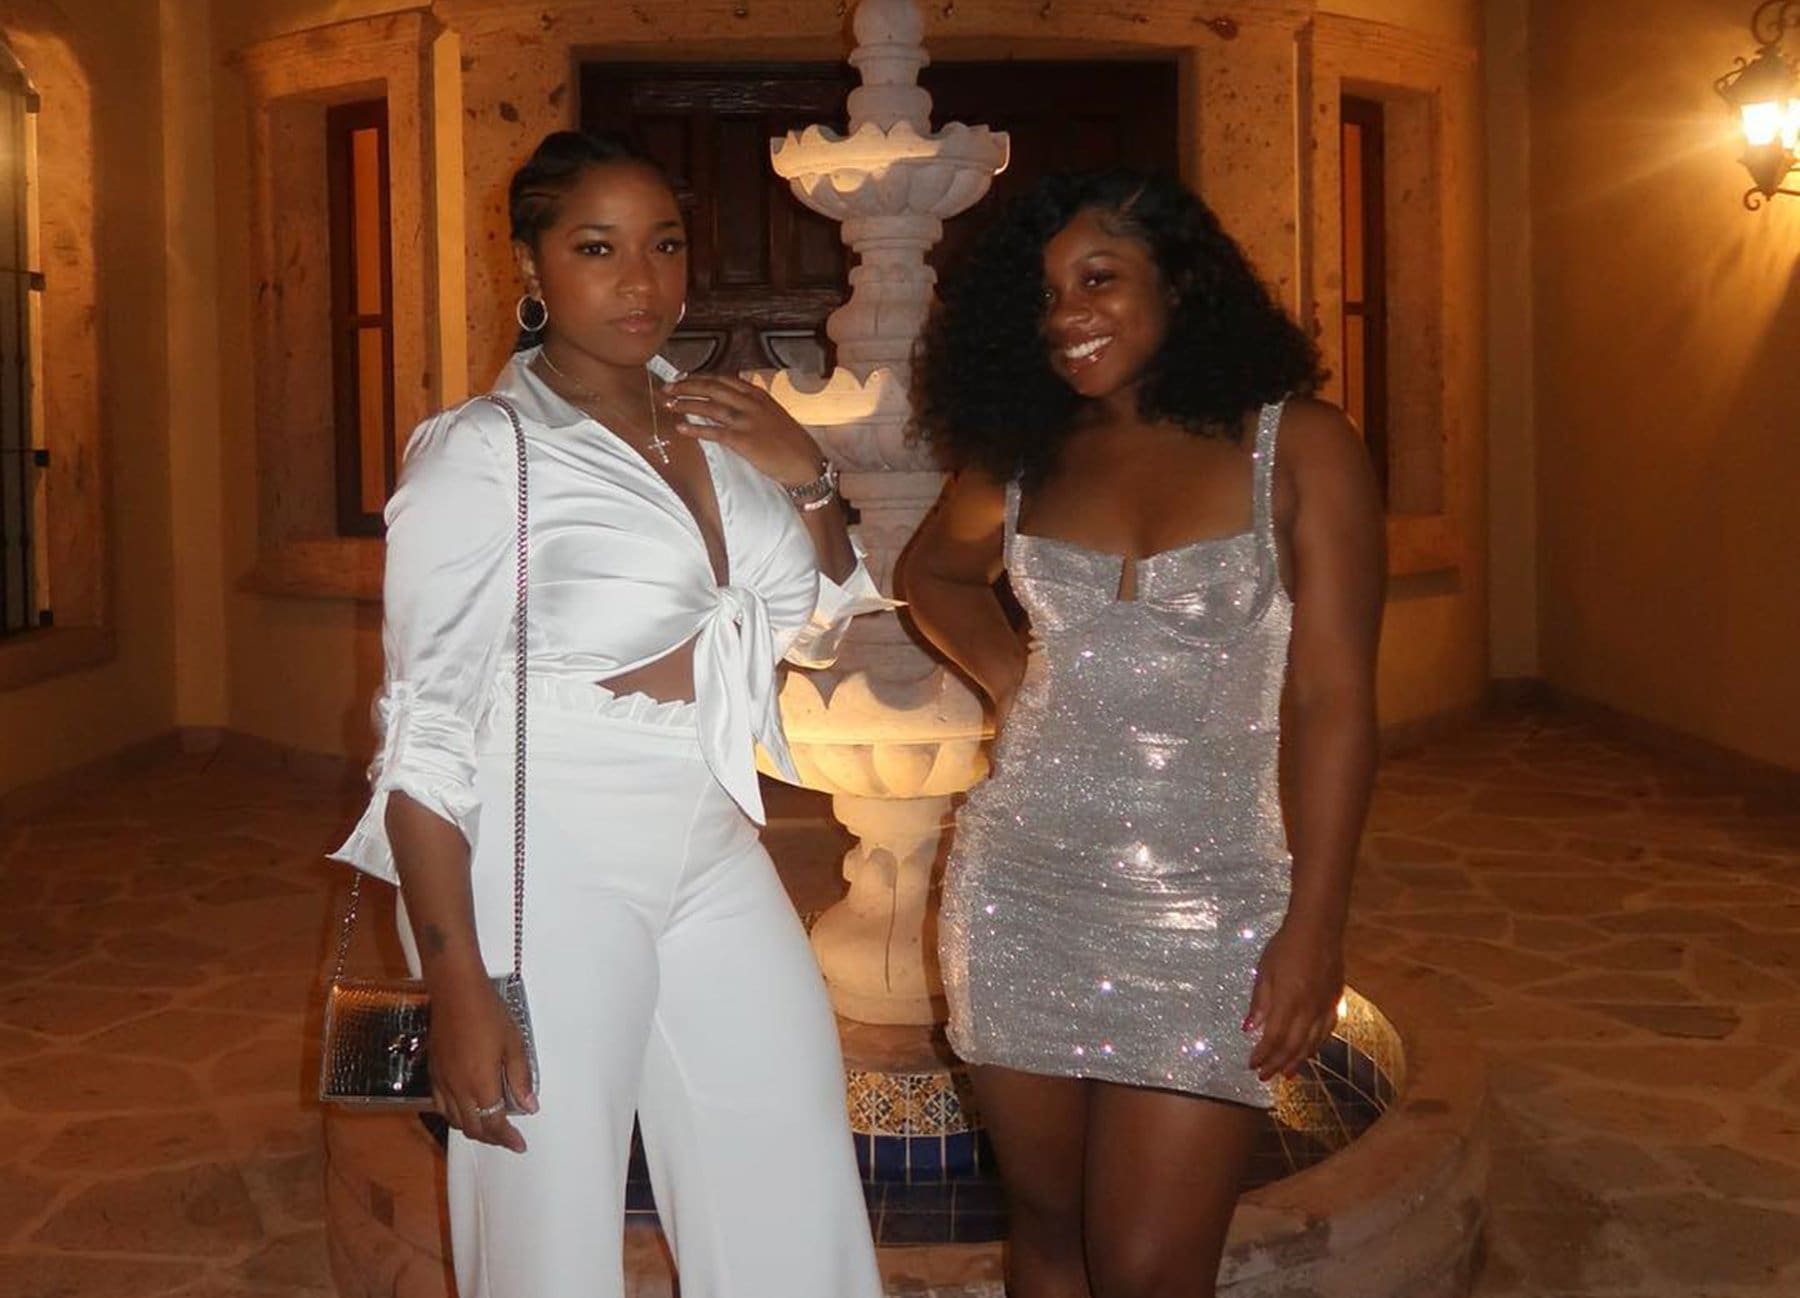 Reginae Carter Lets You In On Her Summer Weight Loss Secret - Watch The Video